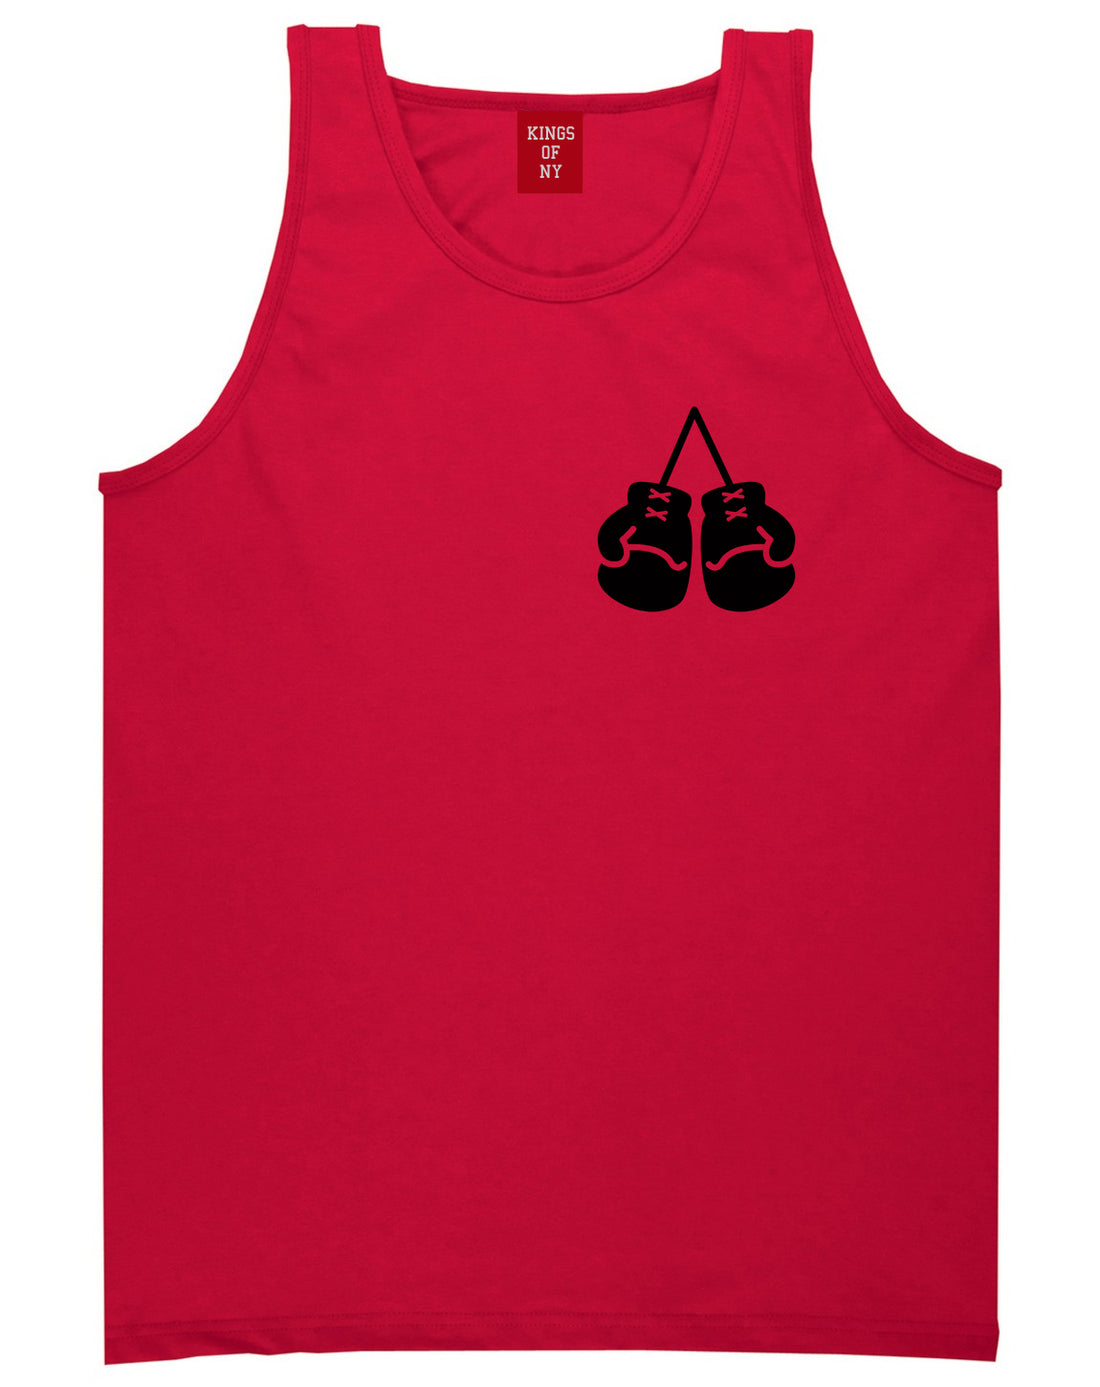 Boxing Gloves Chest Red Tank Top Shirt by Kings Of NY